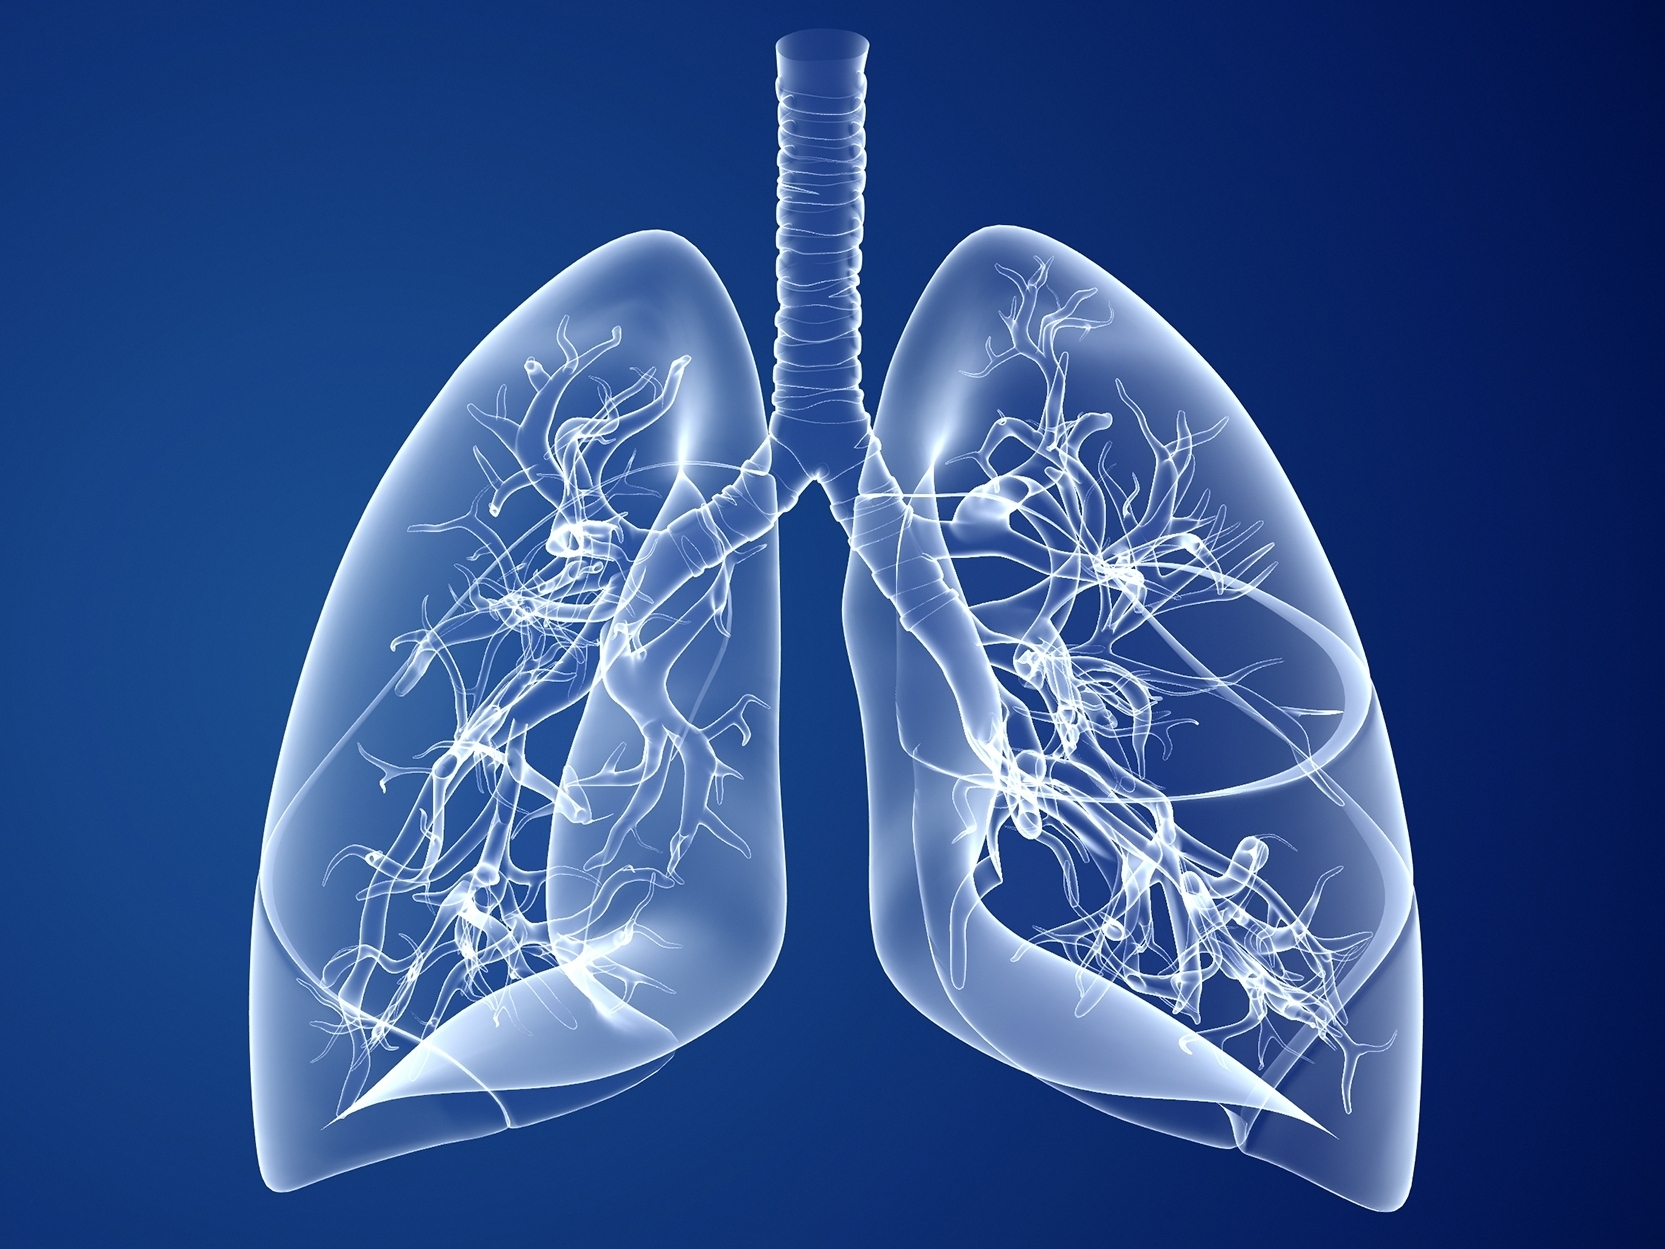 What are the common symptoms and risk factors for COPD?